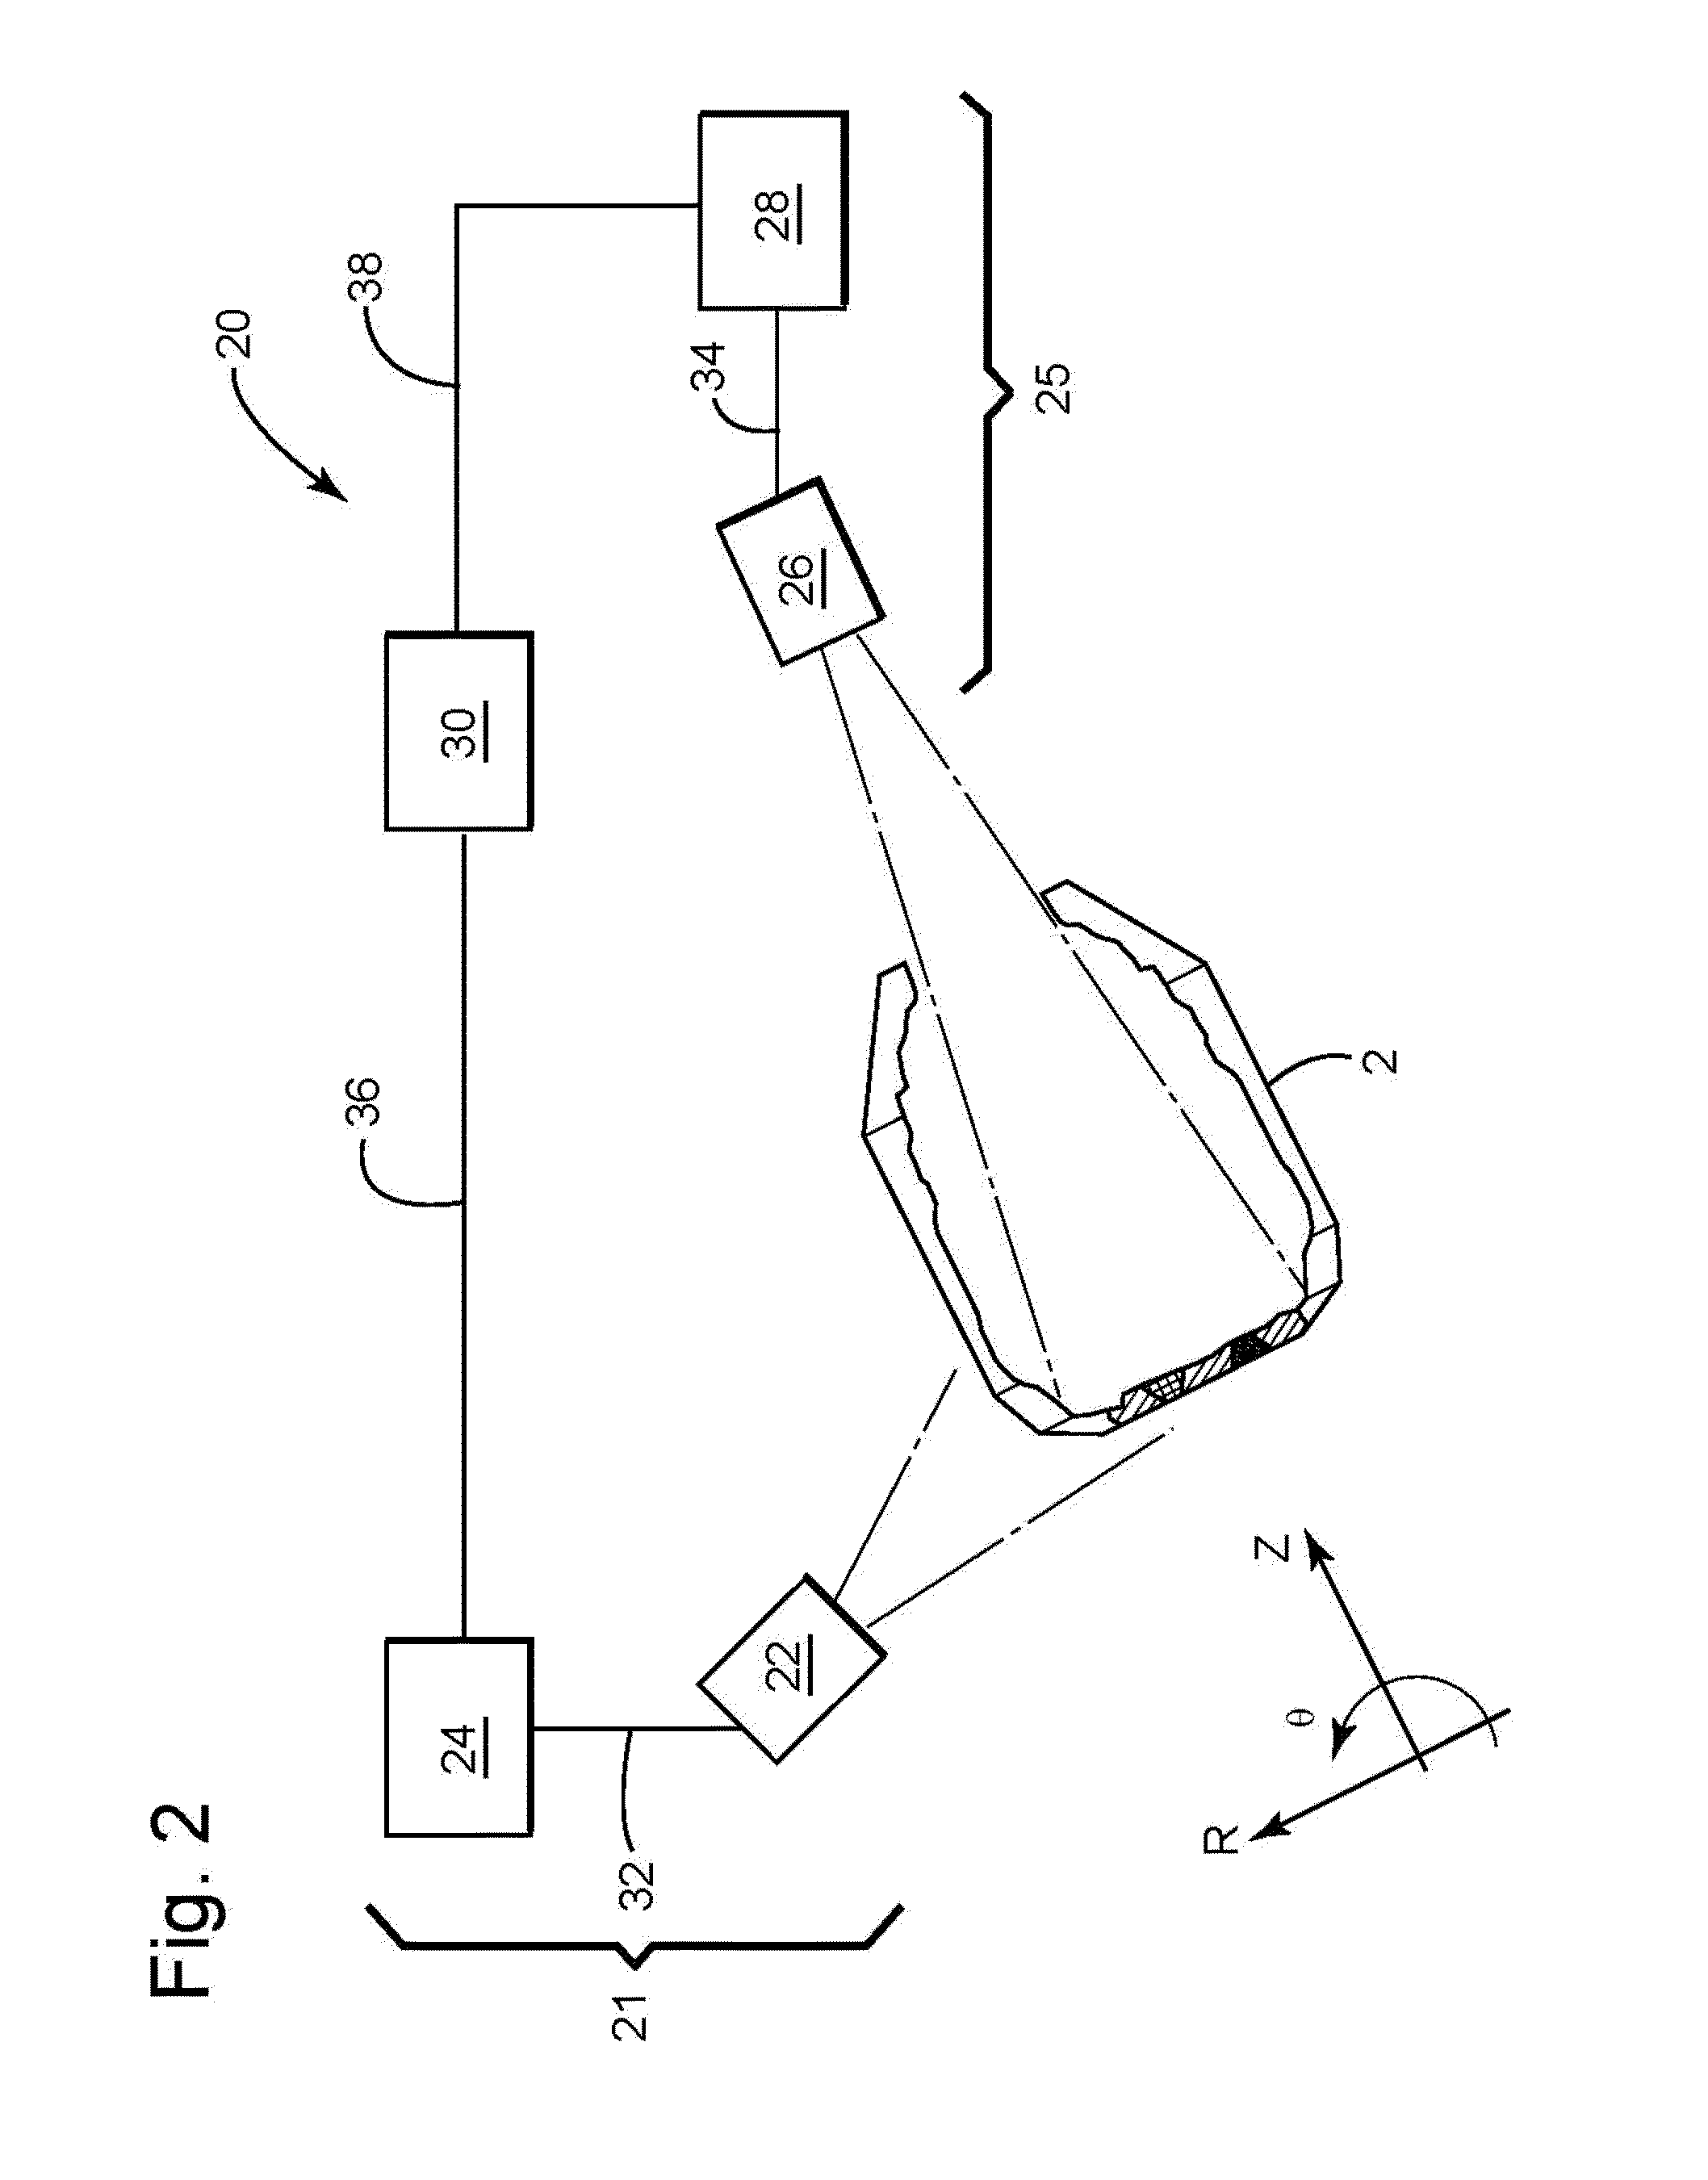 Apparatus, Process, and System for Monitoring the Integrity of Containers